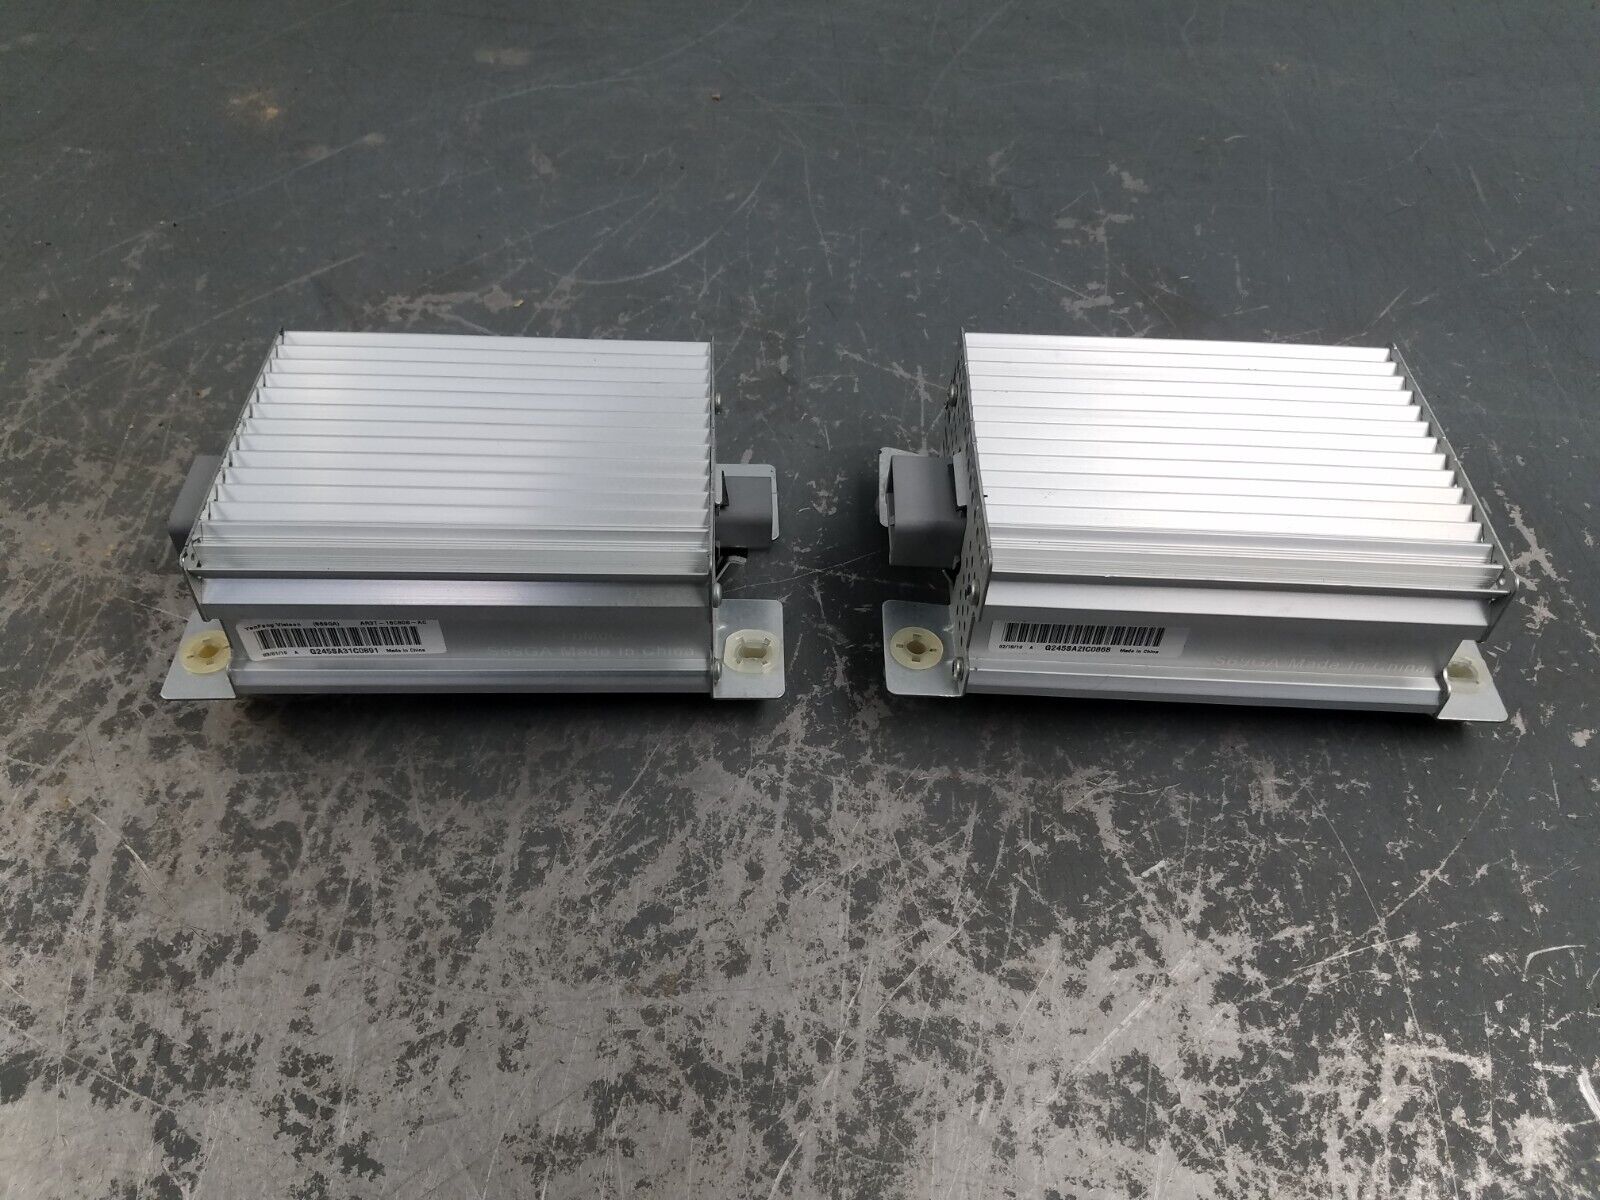 2011 Ford Mustang Shelby GT500 Shaker Stereo Amplifiers #0887 Q6